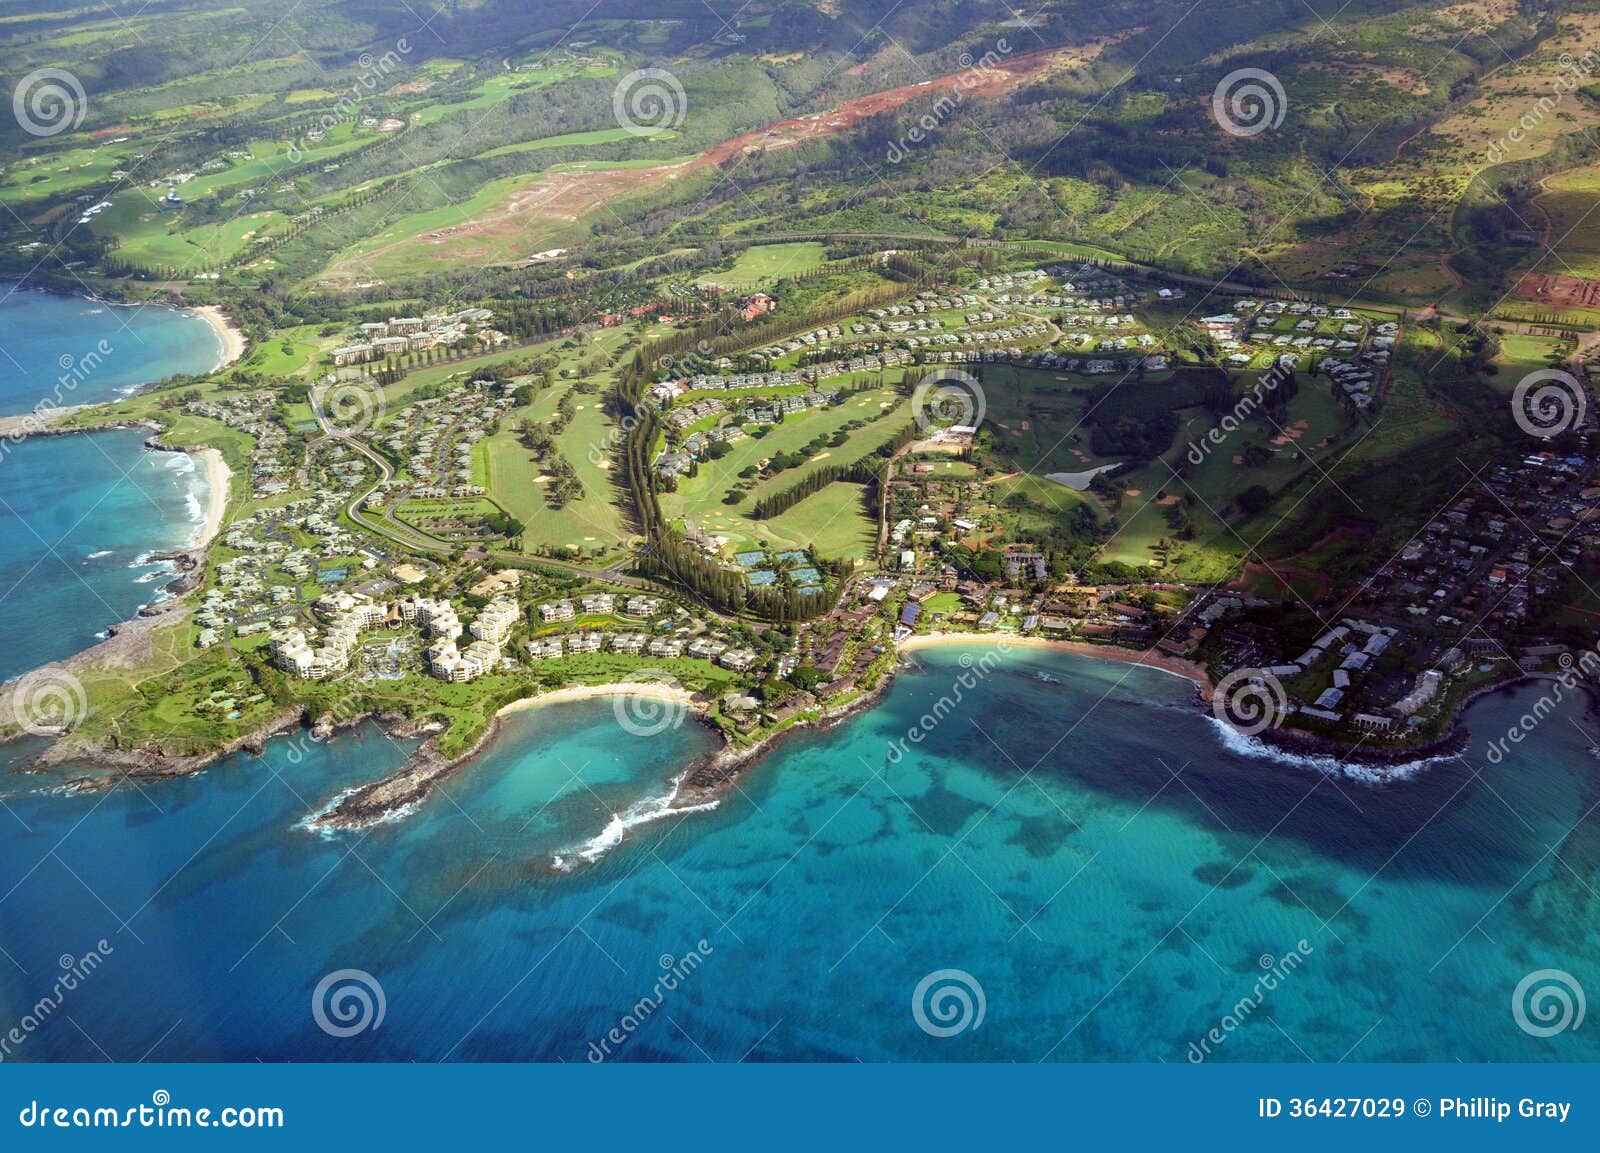 maui from the air